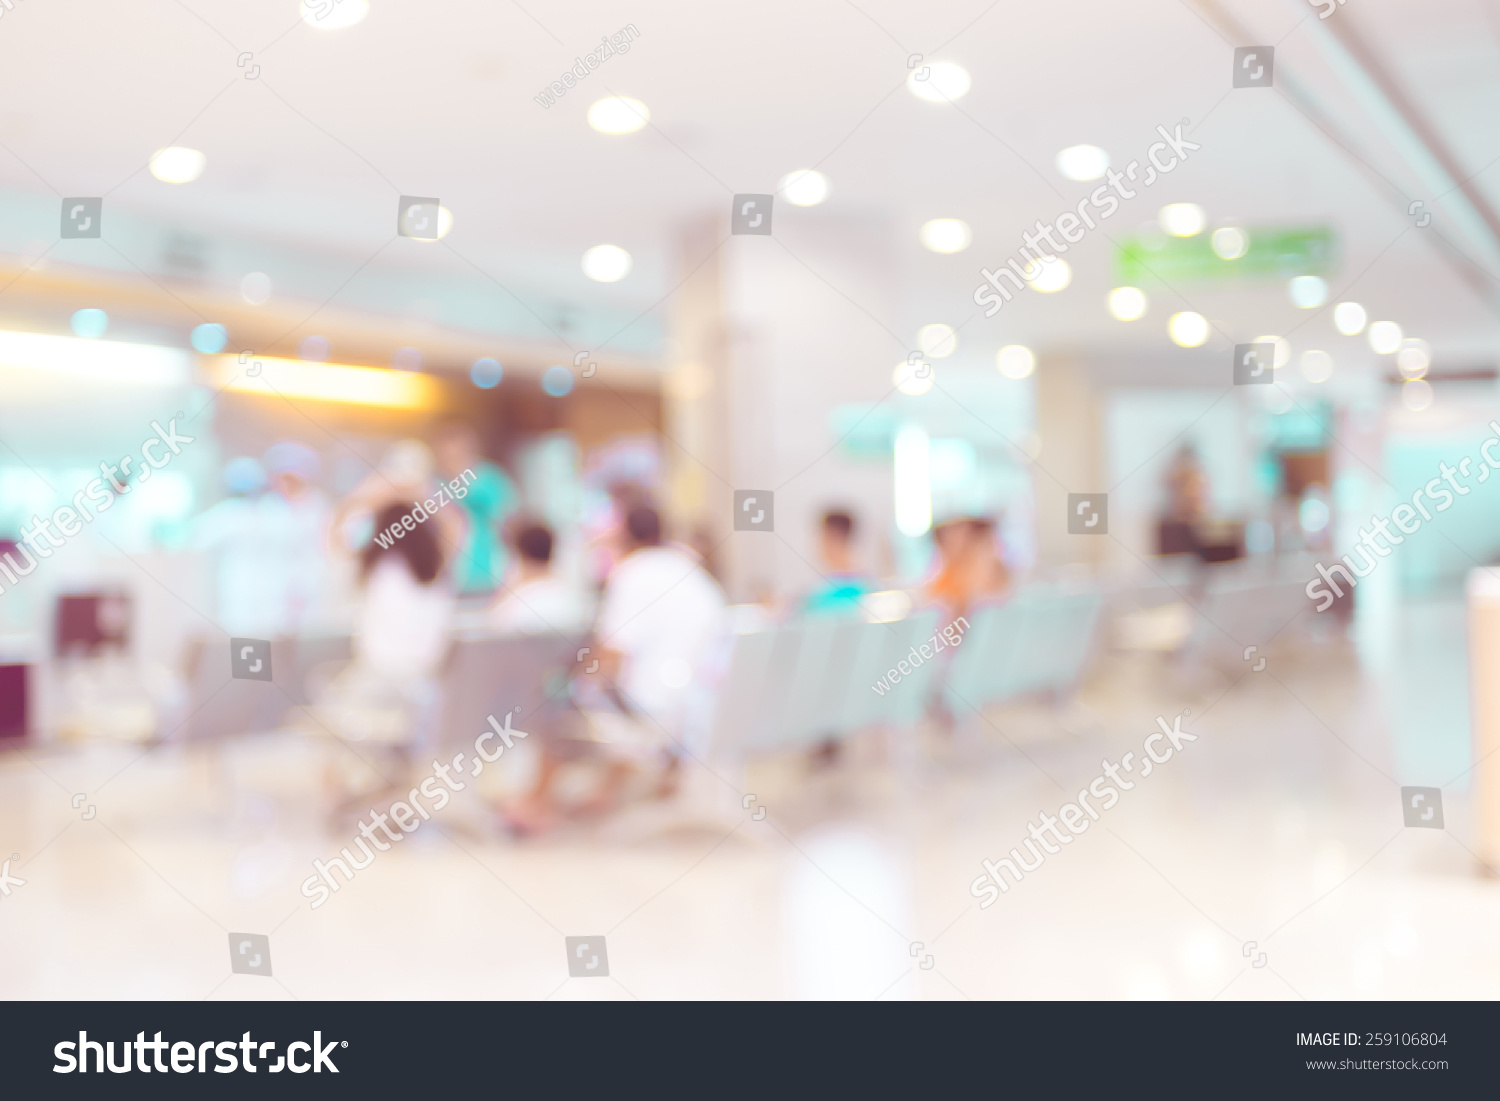 Blurred background : Vintage filter patient waiting for see doctor. #259106804